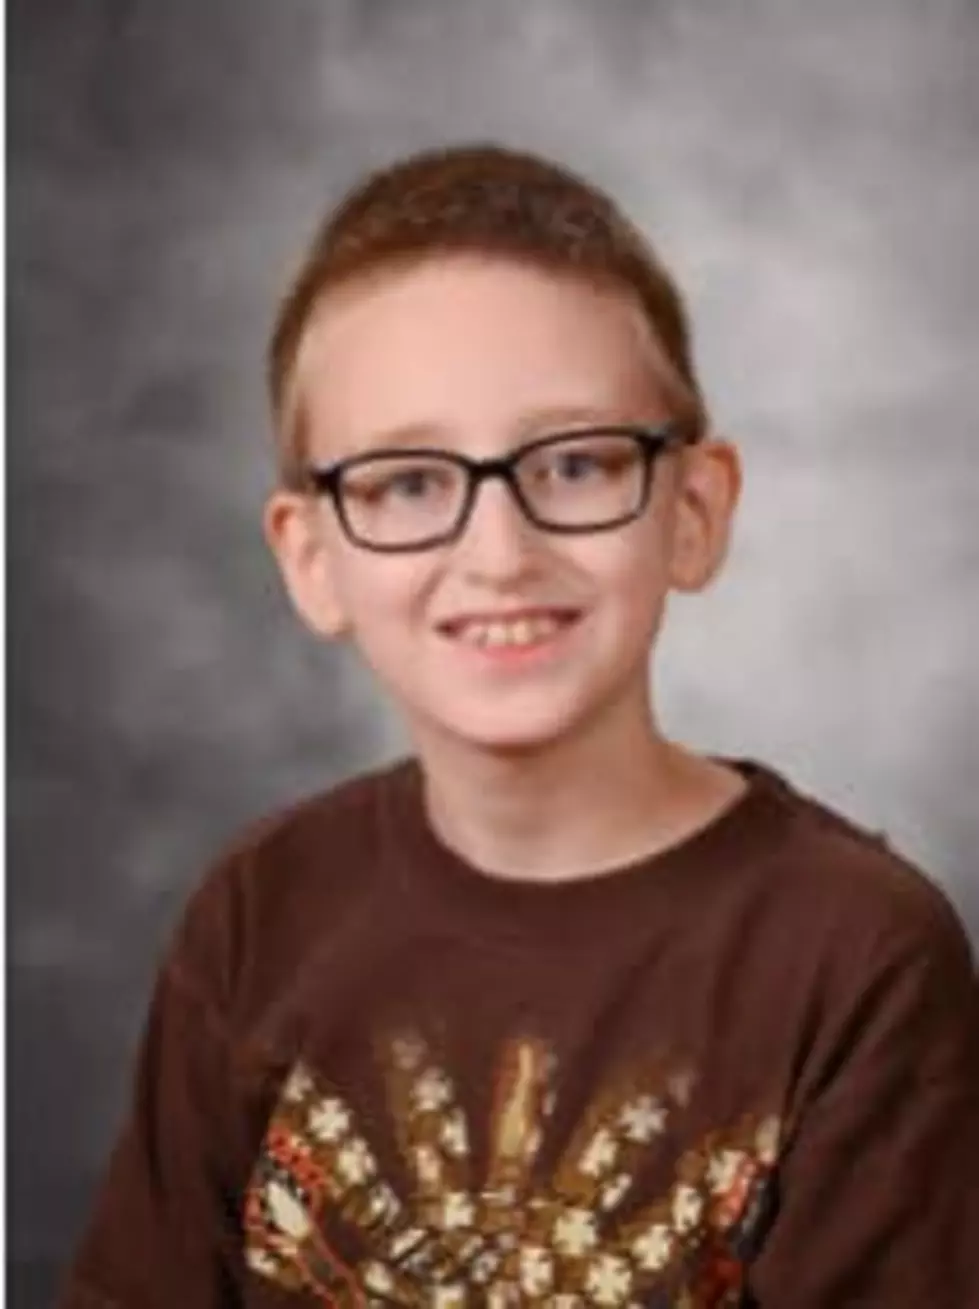 10-Year-Old Boy Missing From Yakima